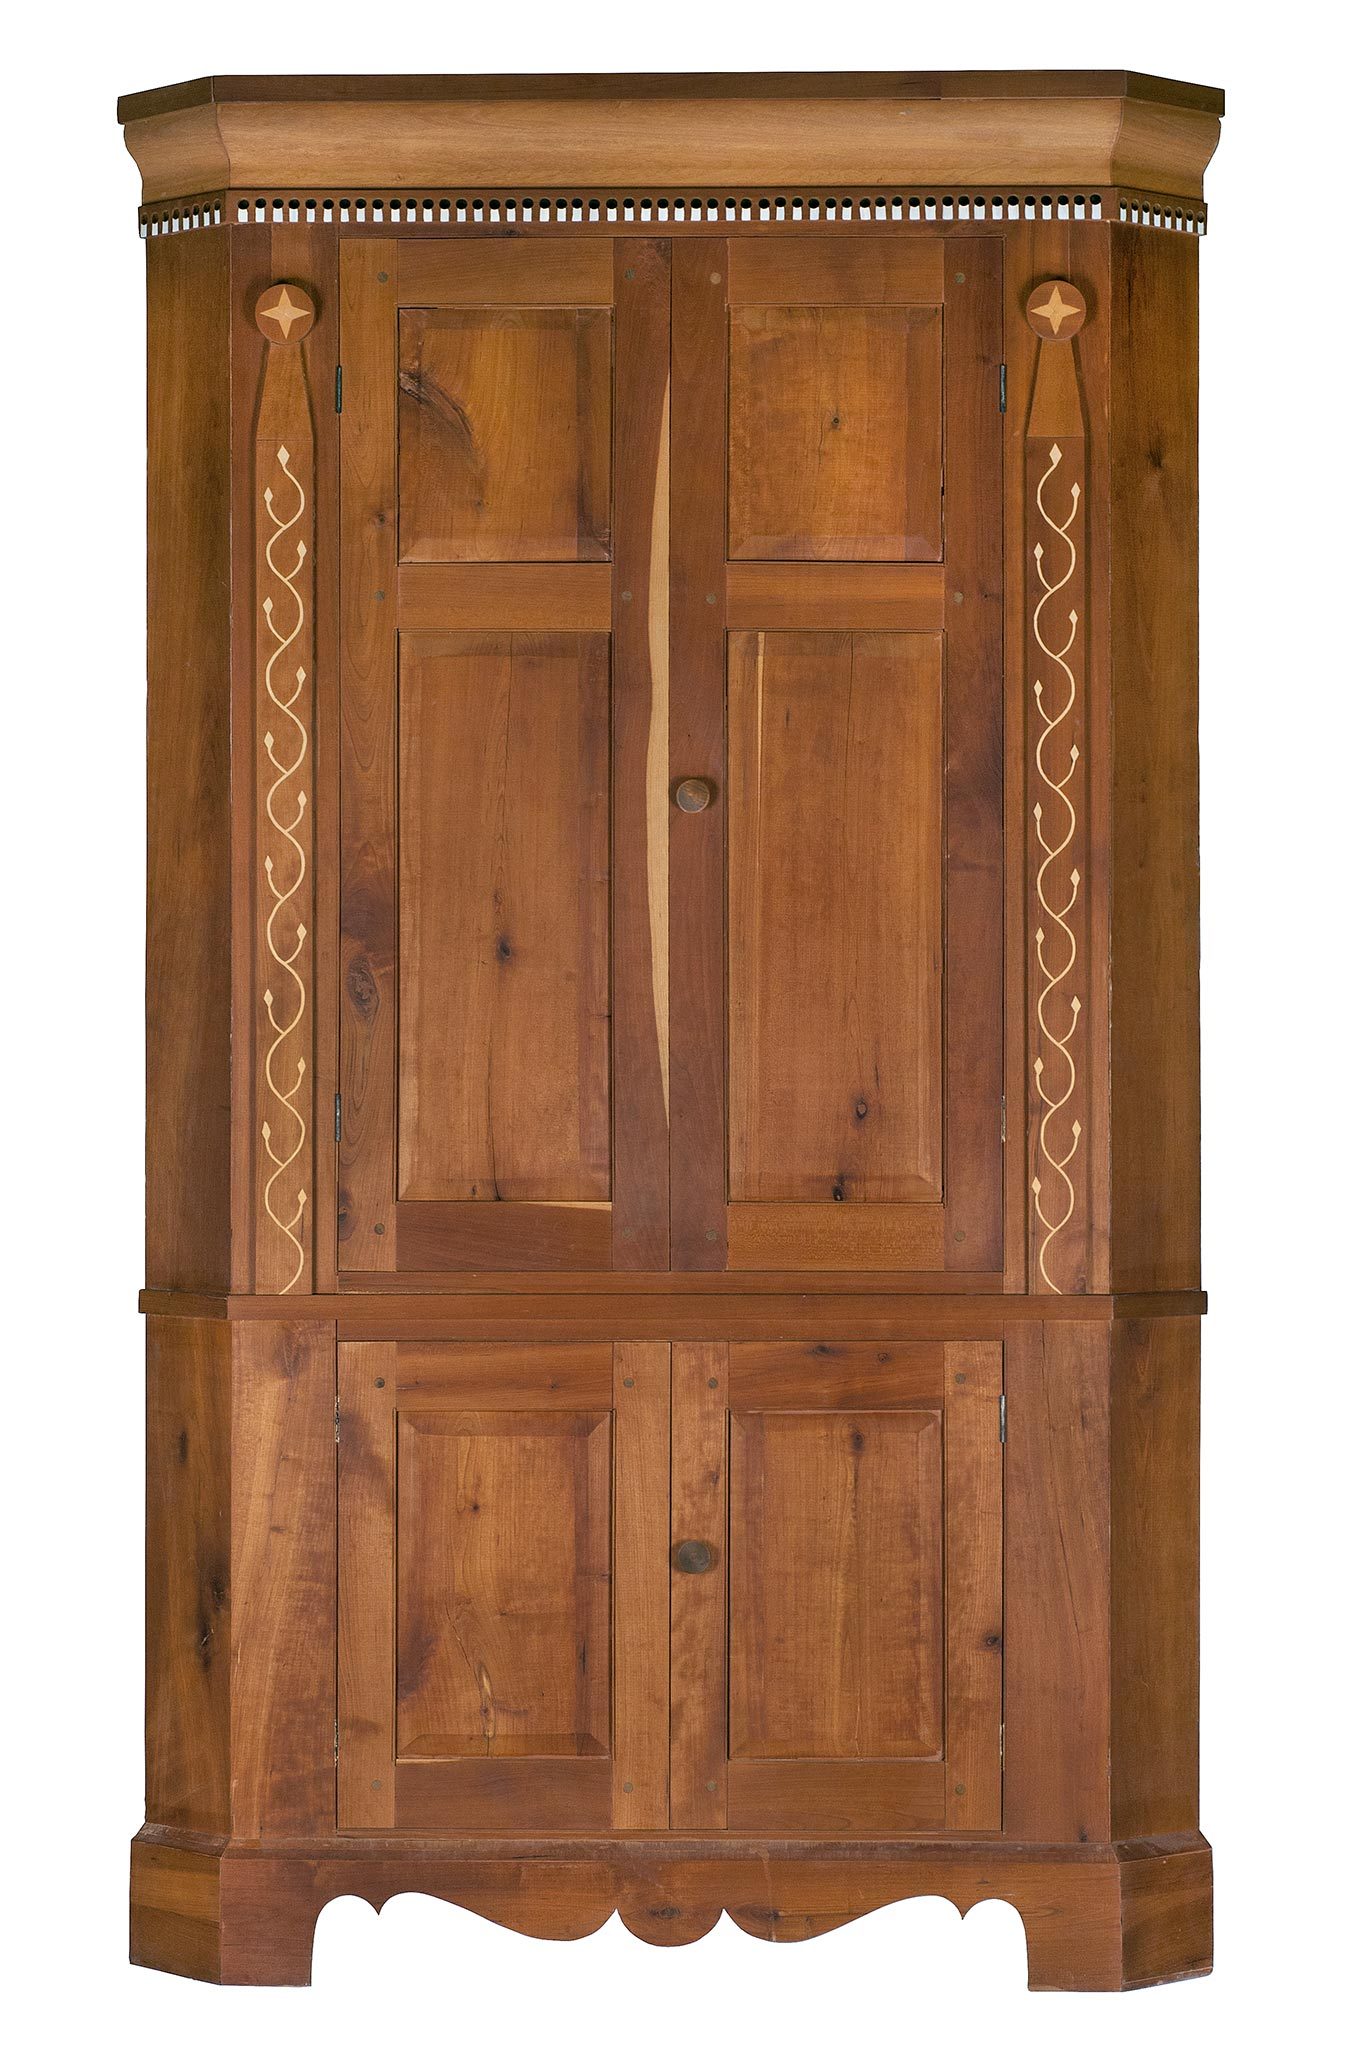 Reproduction of a corner cabinet built by Thomas Lincoln, Indiana State Museum